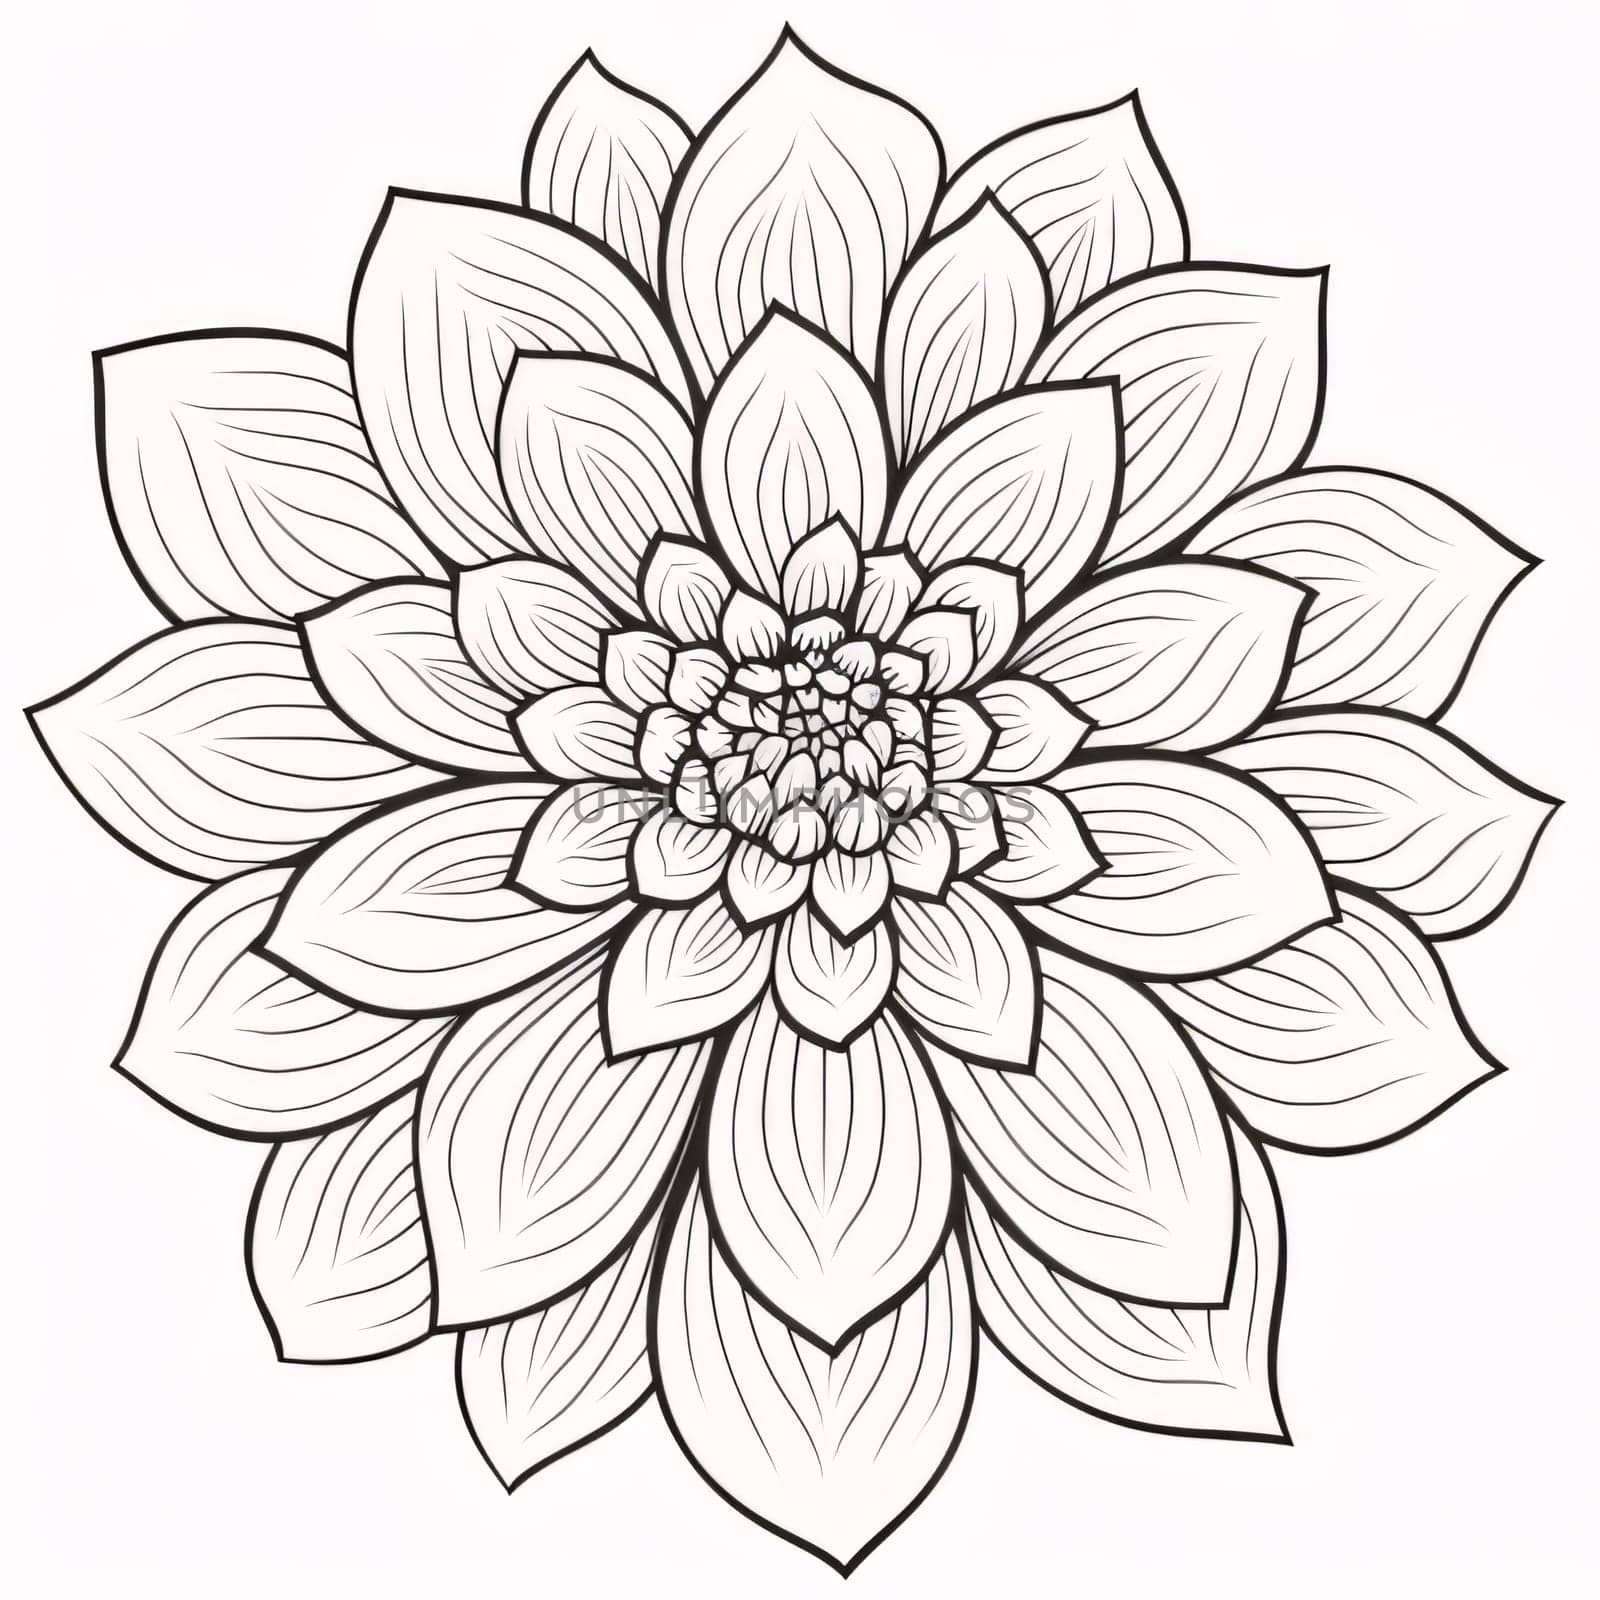 Black and white coloring sheet white dahlia flower. Flowering flowers, a symbol of spring, new life. A joyful time of nature awakening to life.